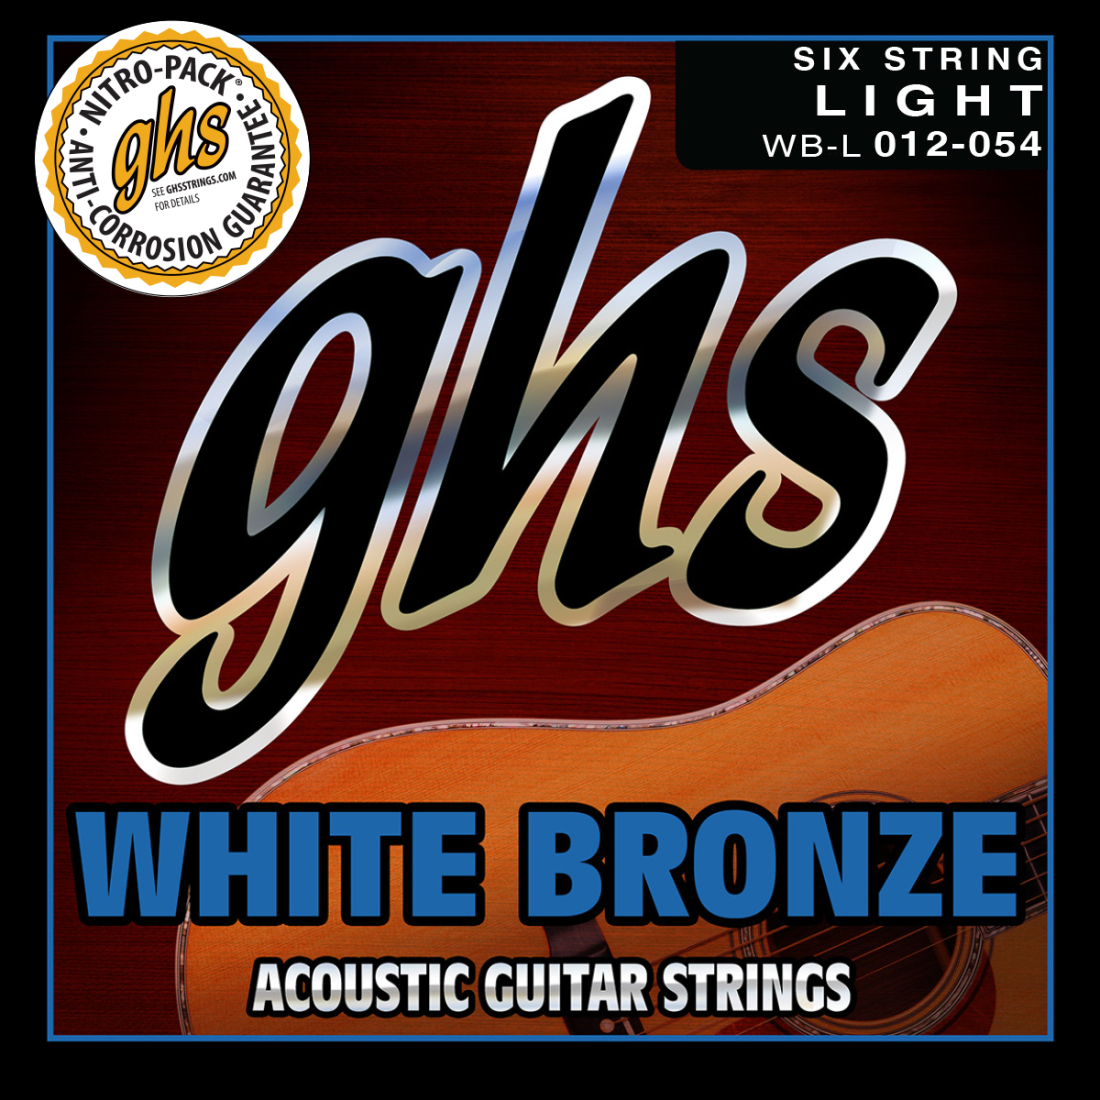 White Bronze Acoustic Electric Guitar Strings - Standard Light